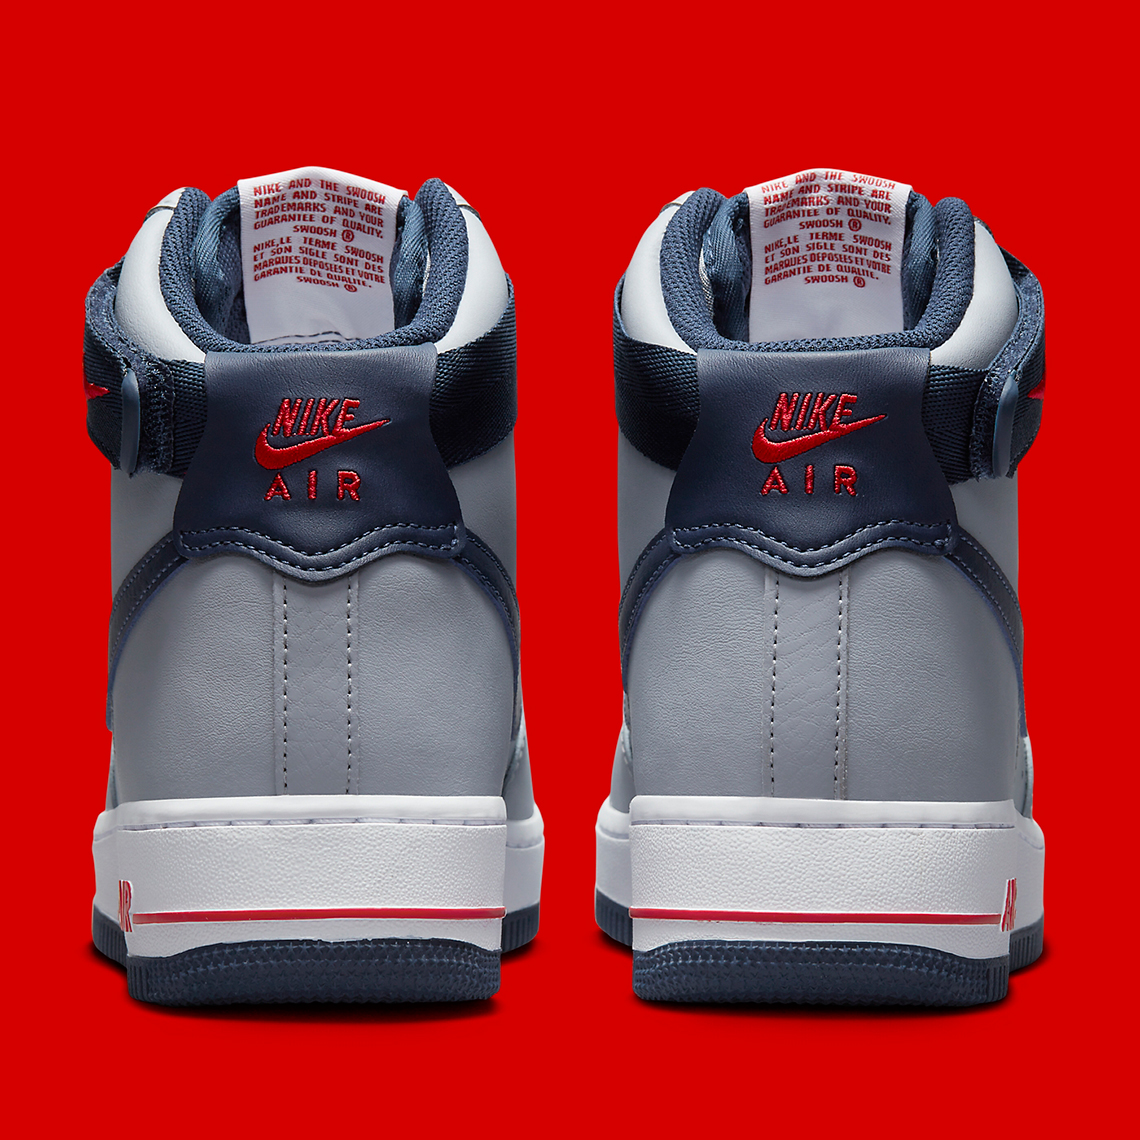 Nike Air Force 1 High Grey Navy Red Dz7338 001 2